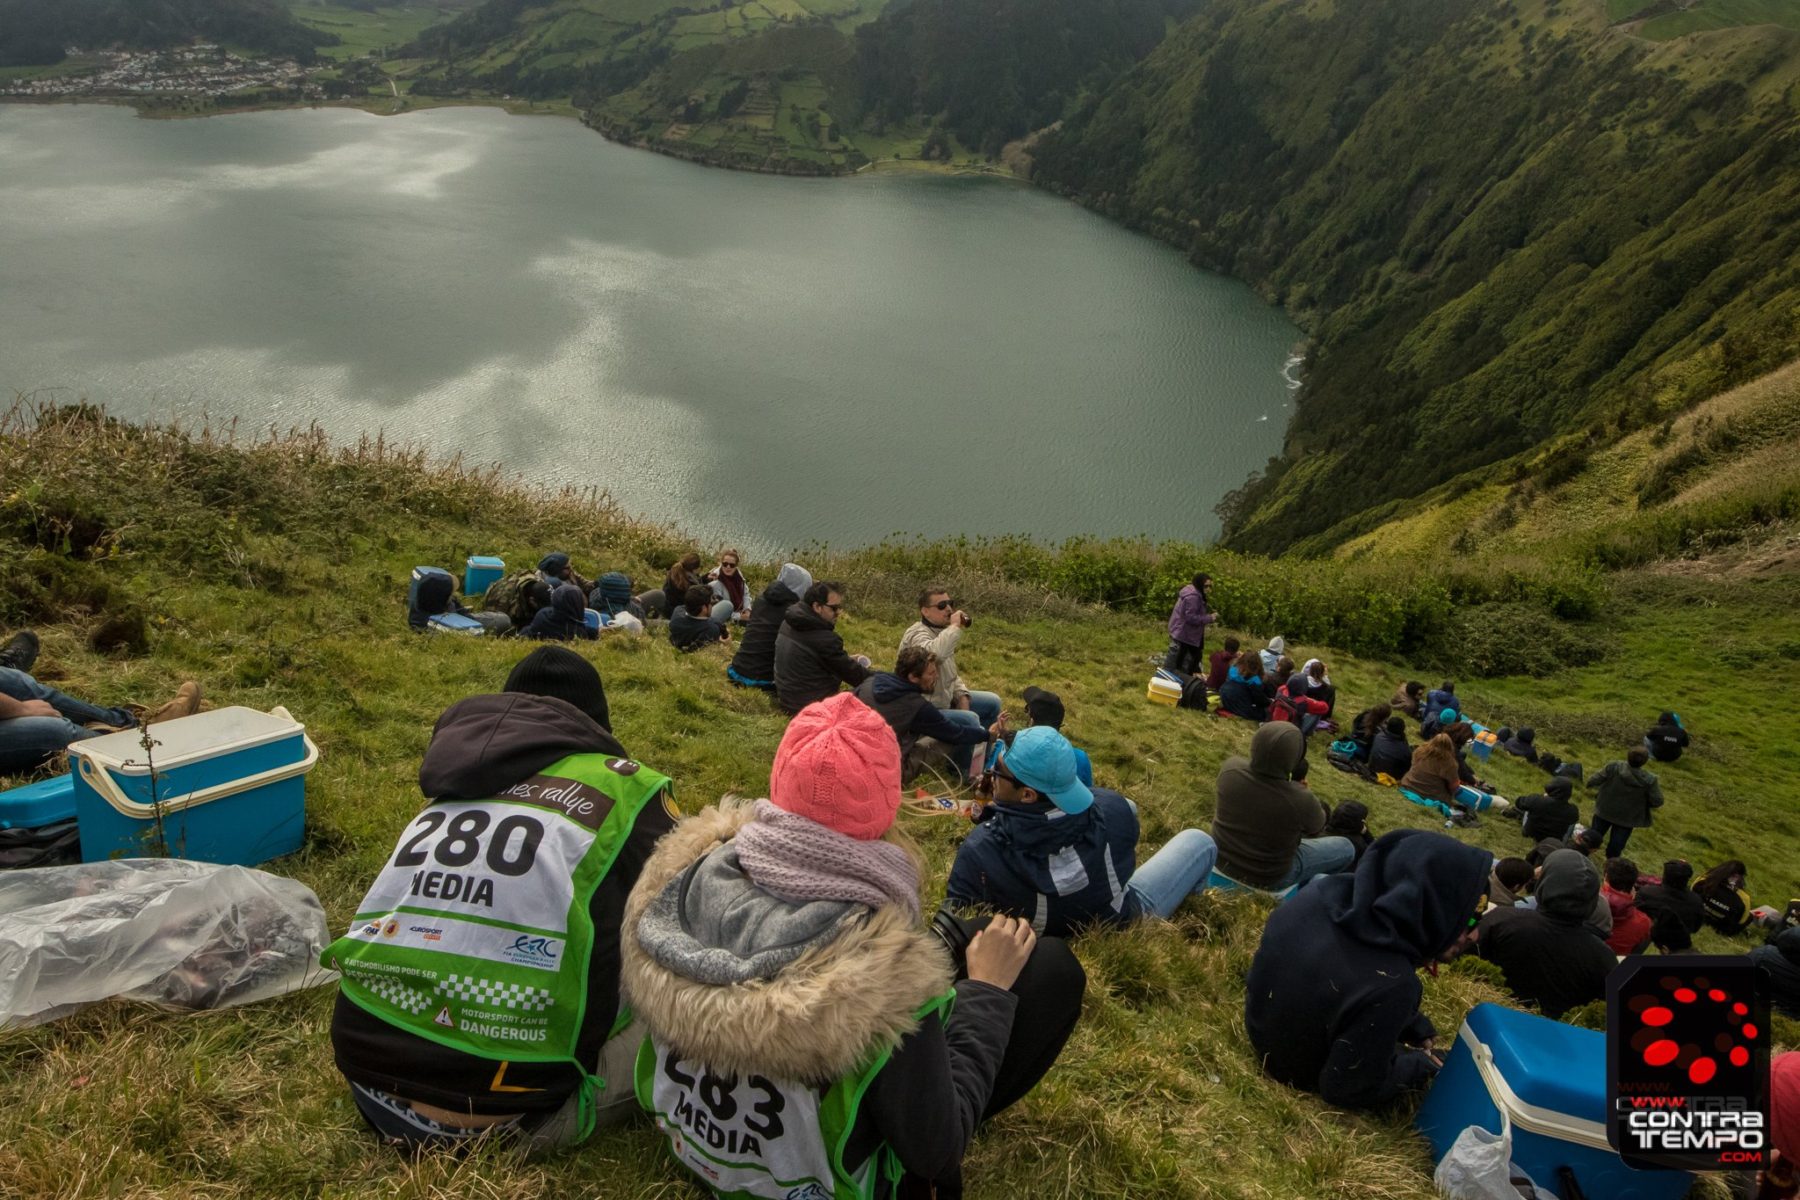 Azores Airlines Rallye 2017